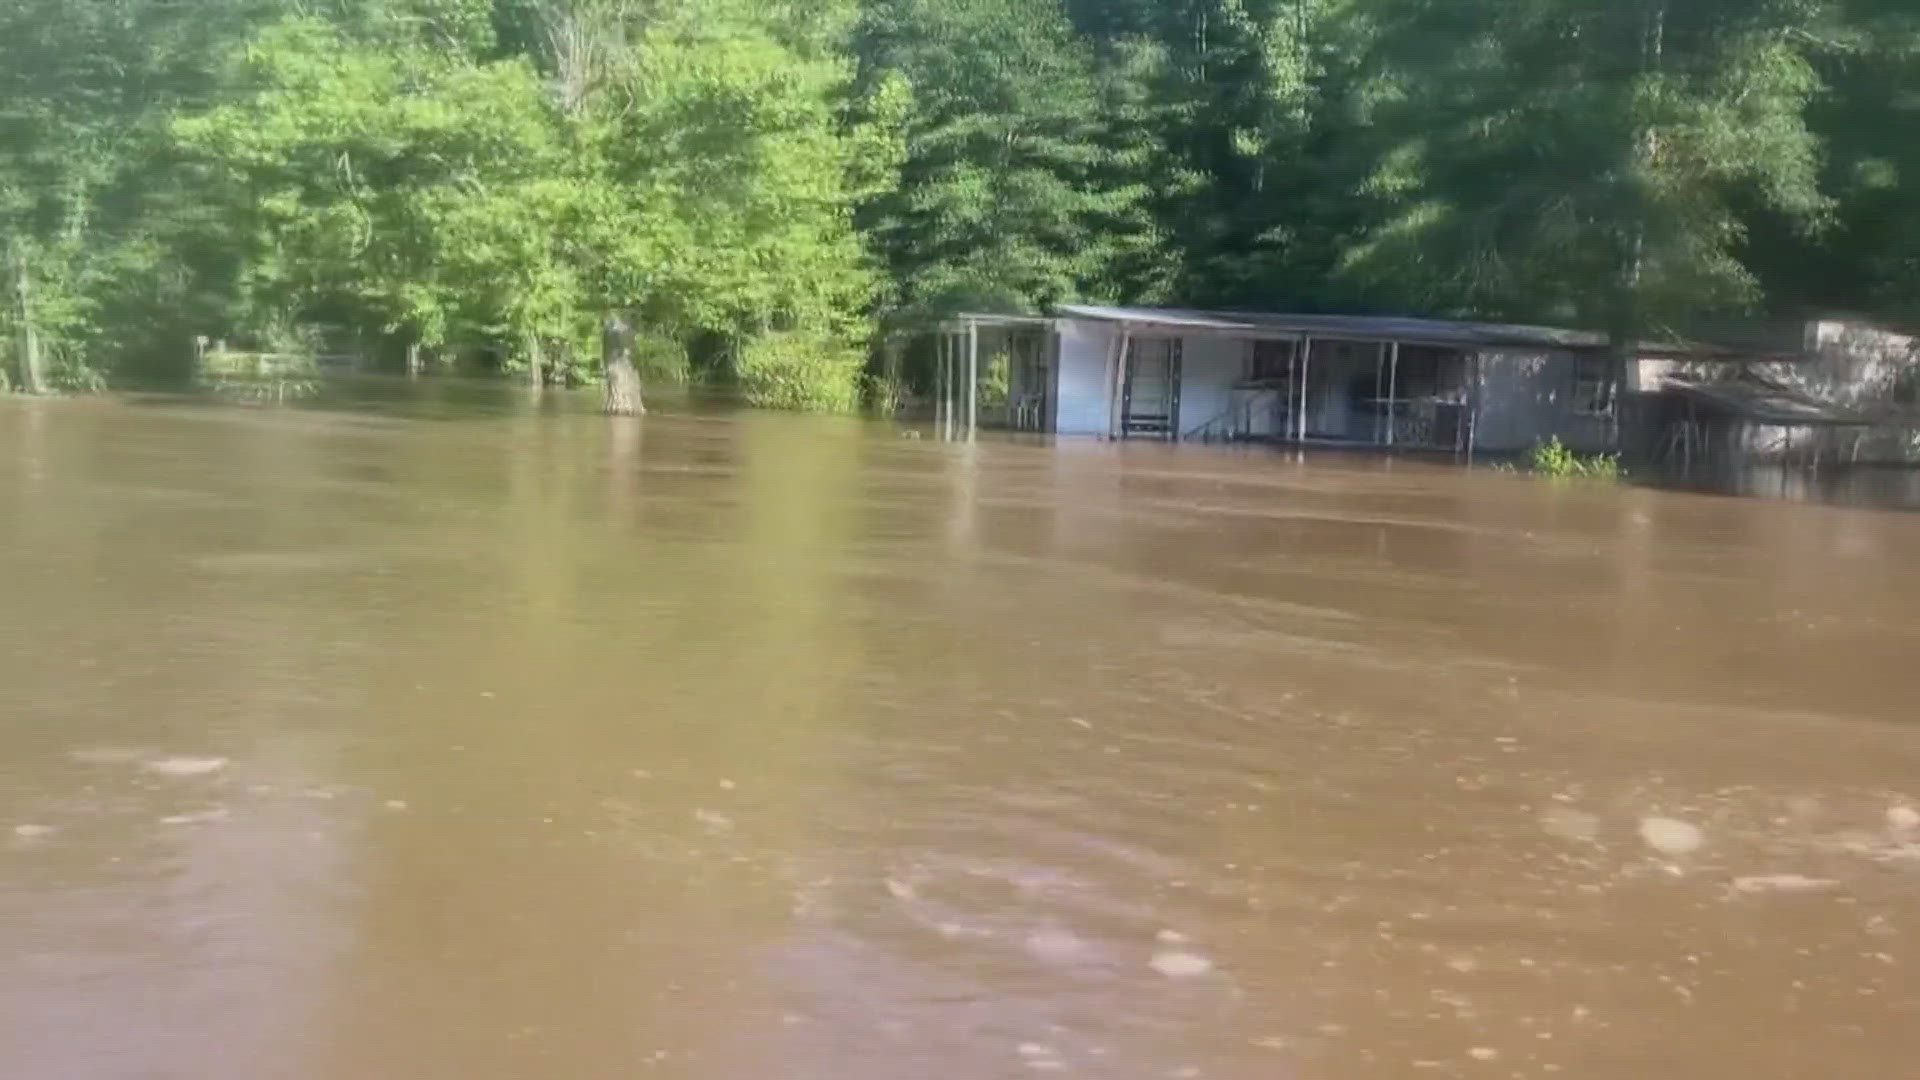 Volunteer firefighters in Beech Grove spent much of Sunday ferrying supplies to residents in northwest Jasper County who remain flooded in following recent rains.